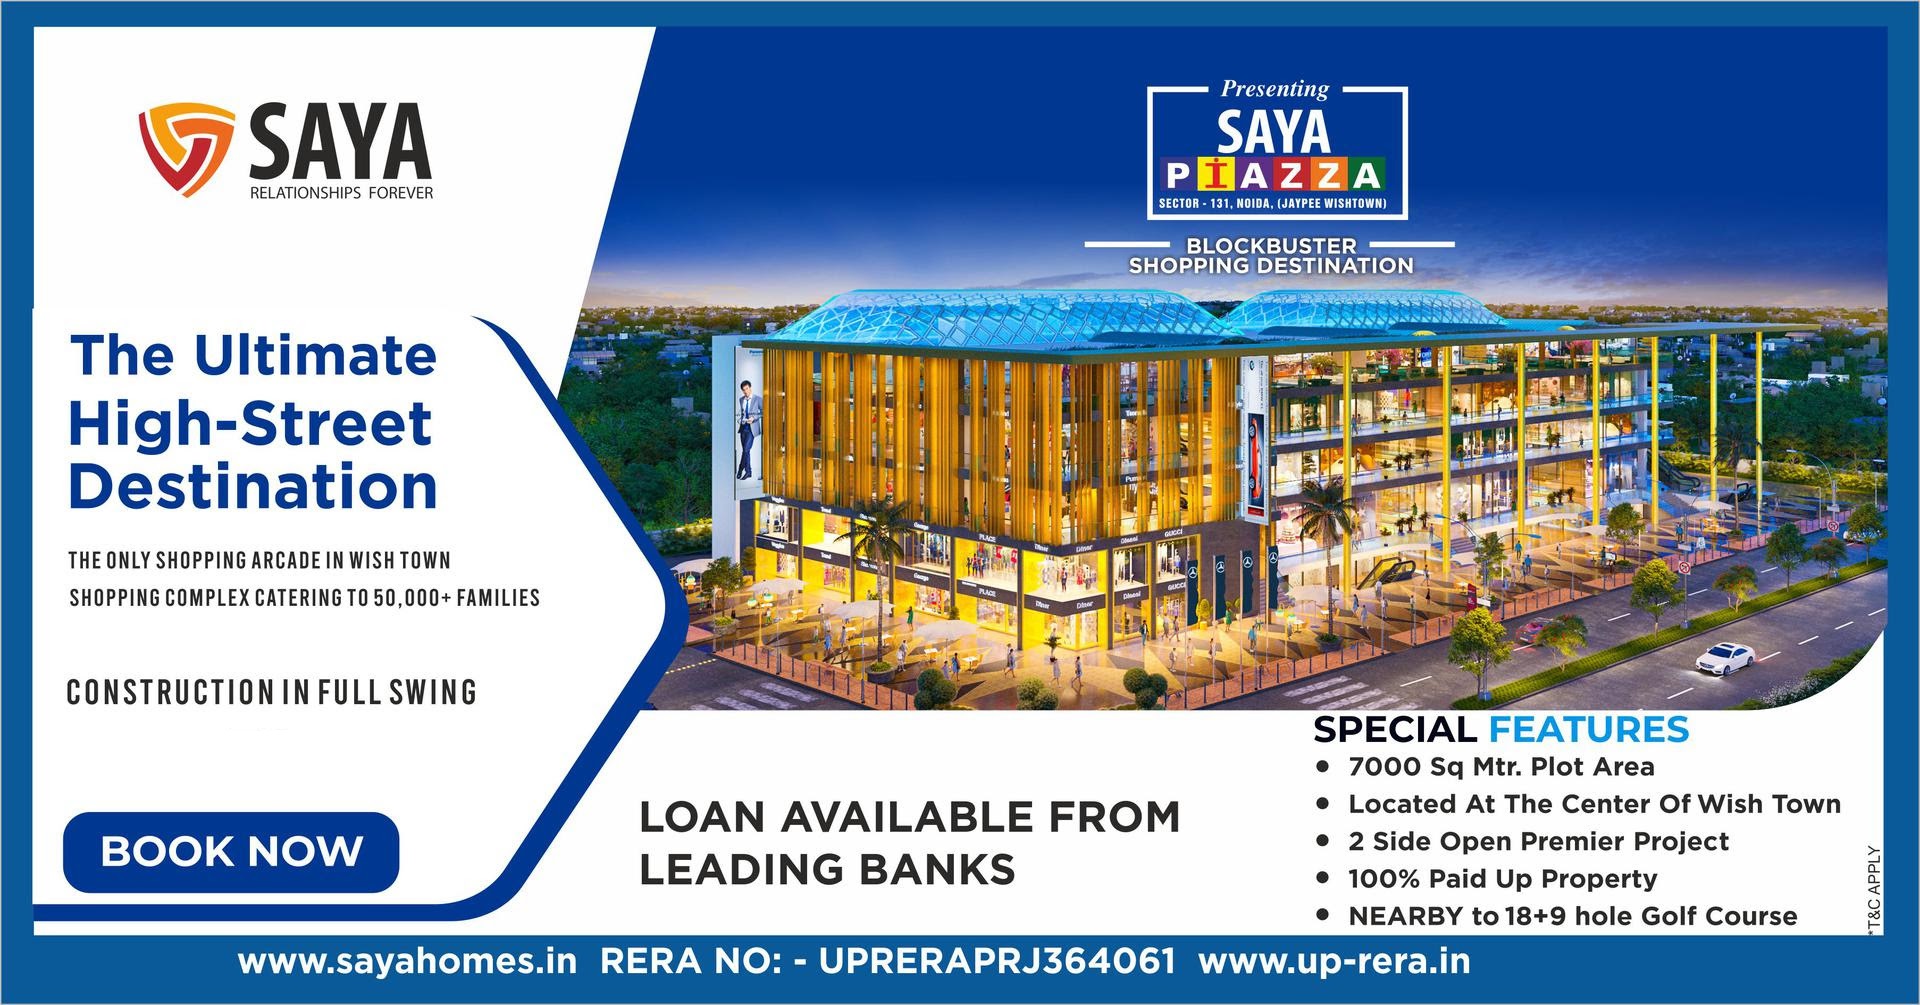 Loan available from leading banks at Saya Piazza, Sector 131, Noida Update